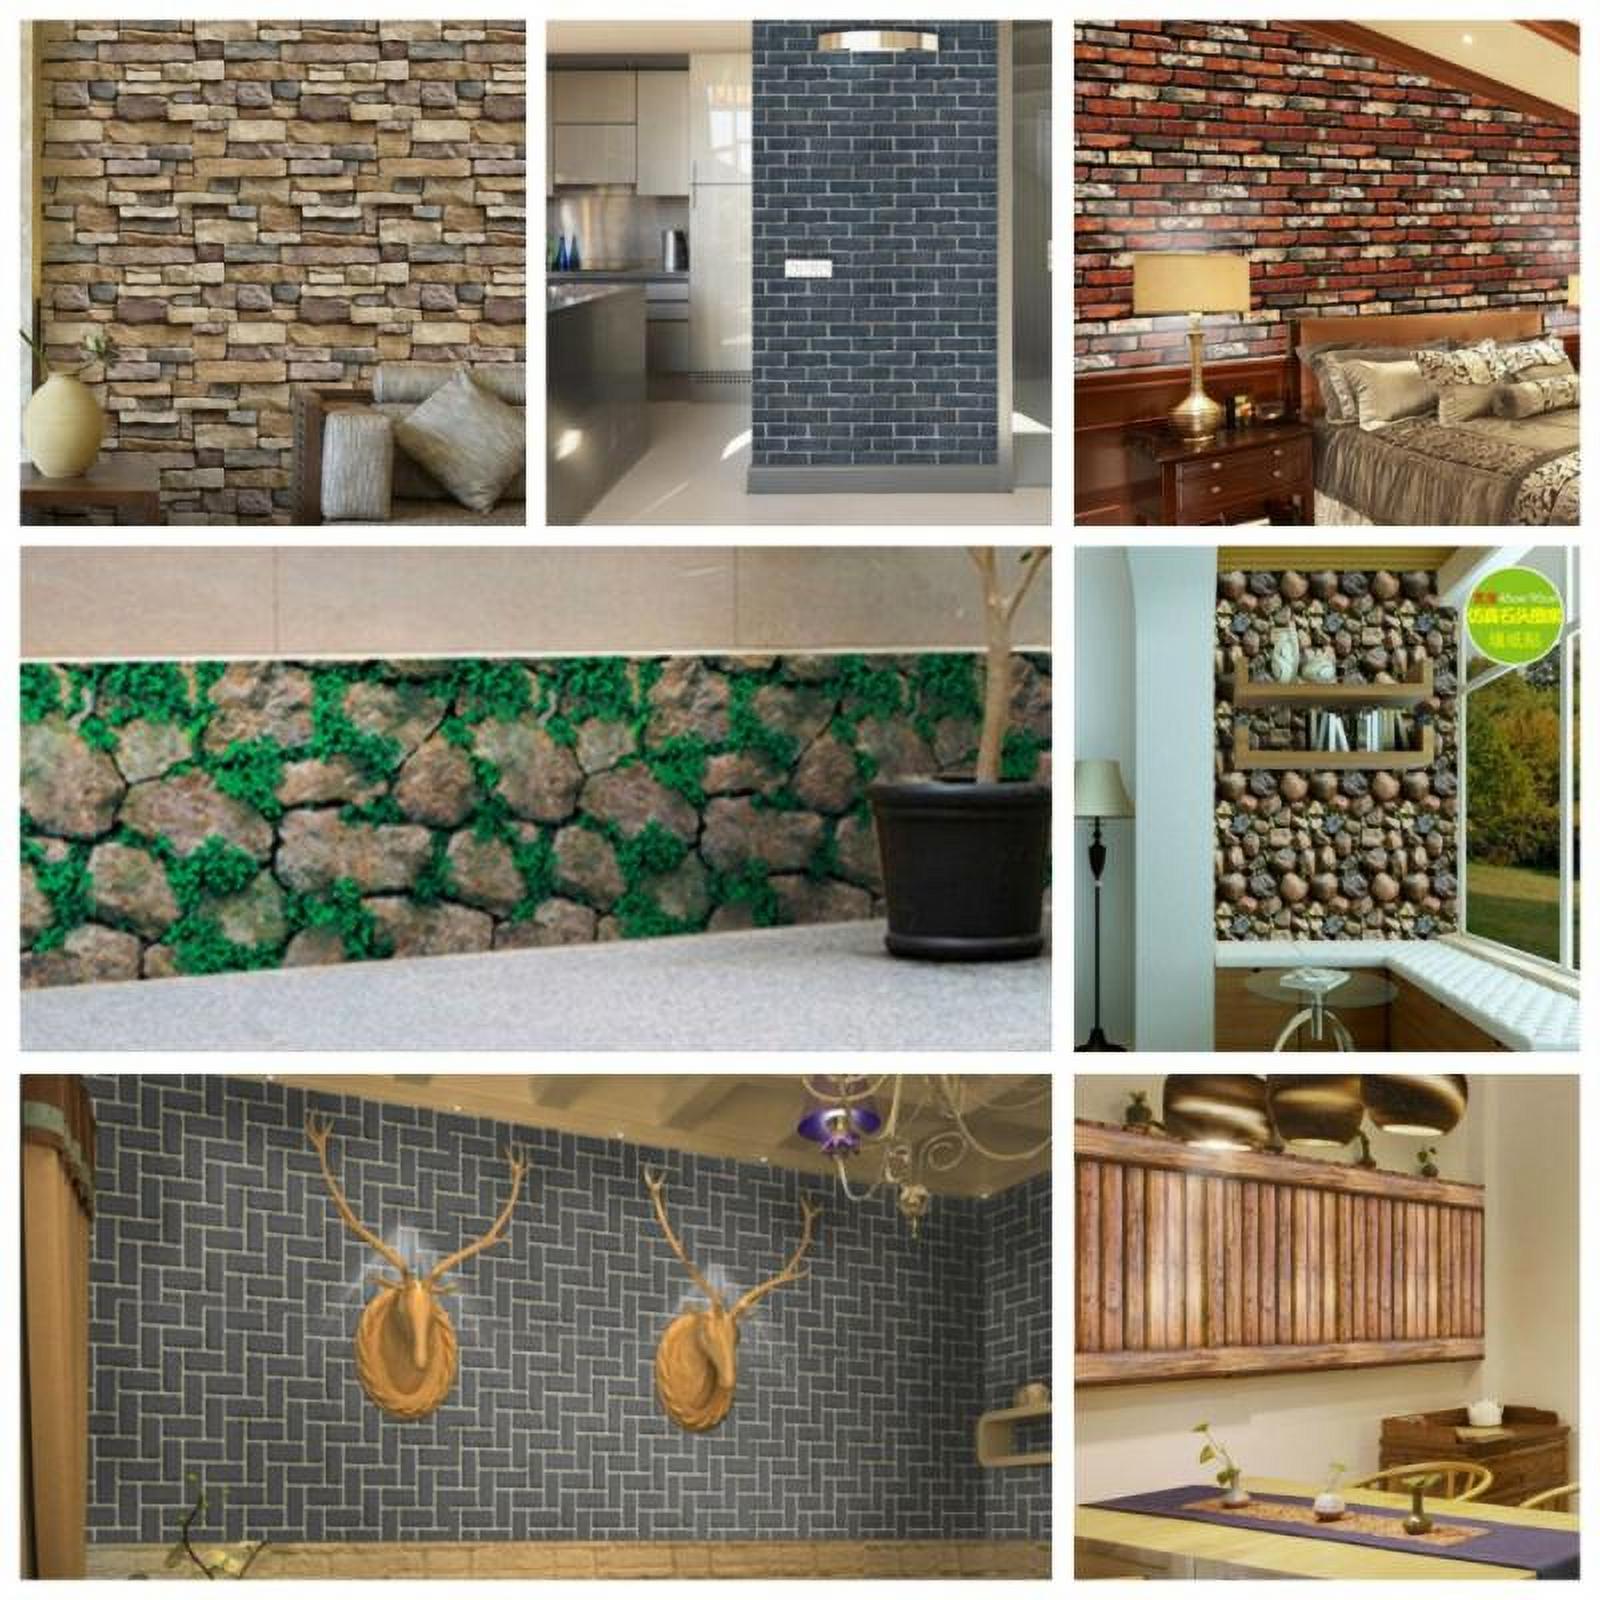 Keimprove 3D Brick Wall Stickers Self-Adhesive PVC Wallpaper Peel and Stick 3D Art Wall Panels for Living Room Bedroom Background Wall Decoration,Wall Panels Peel and Stick Wallpaper - image 3 of 7